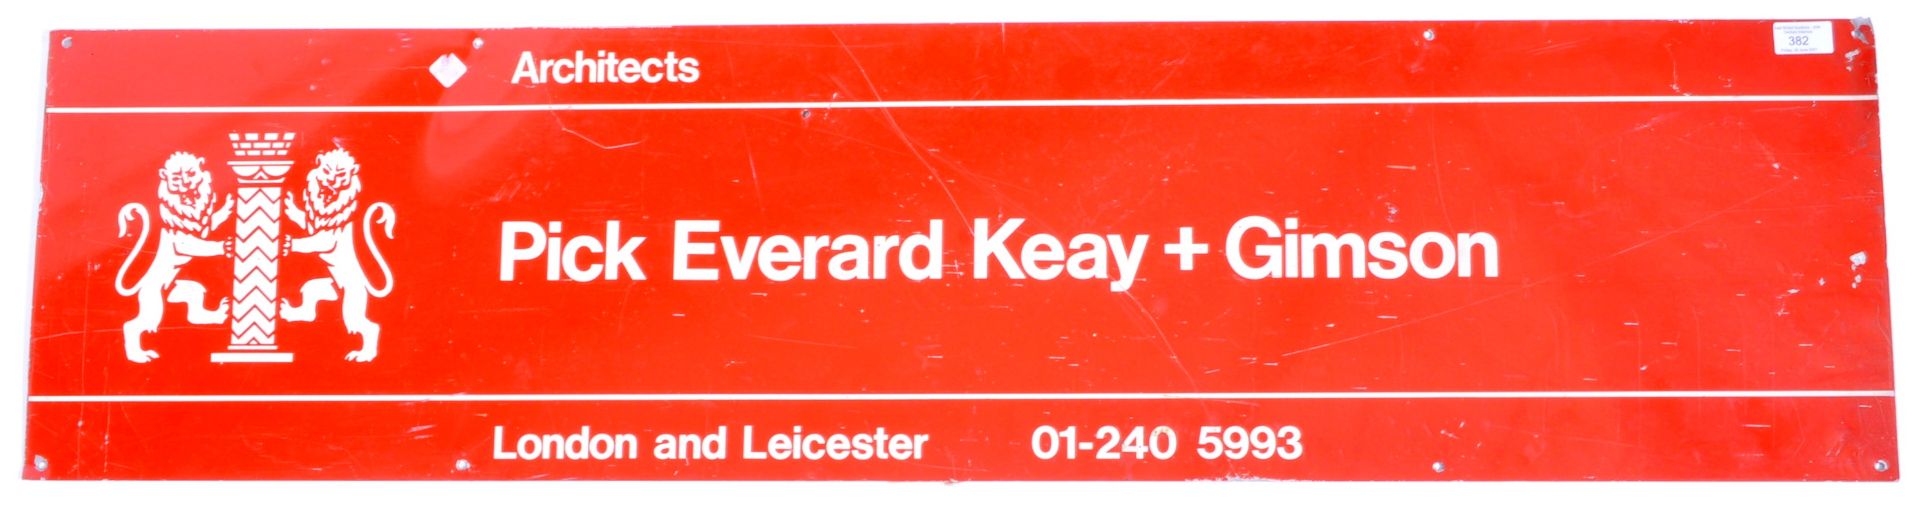 PICK EVERARD KEAY + GIMSON ARCHITECTS ADVERTISING METAL SIGN - Image 2 of 6